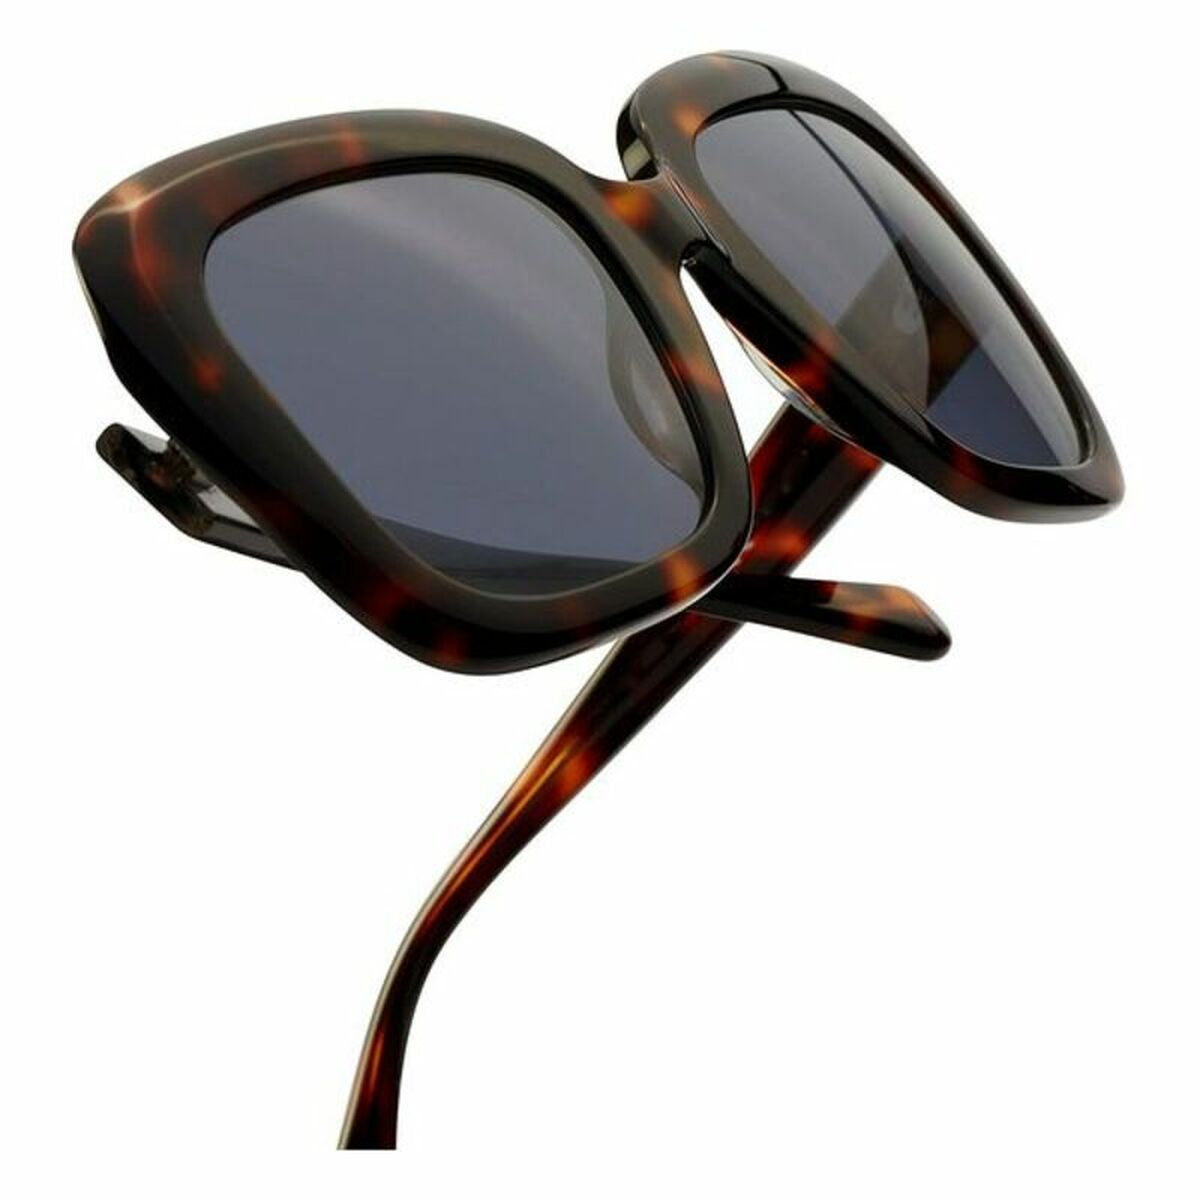 Ladies'Sunglasses Butterfly Hawkers 110048